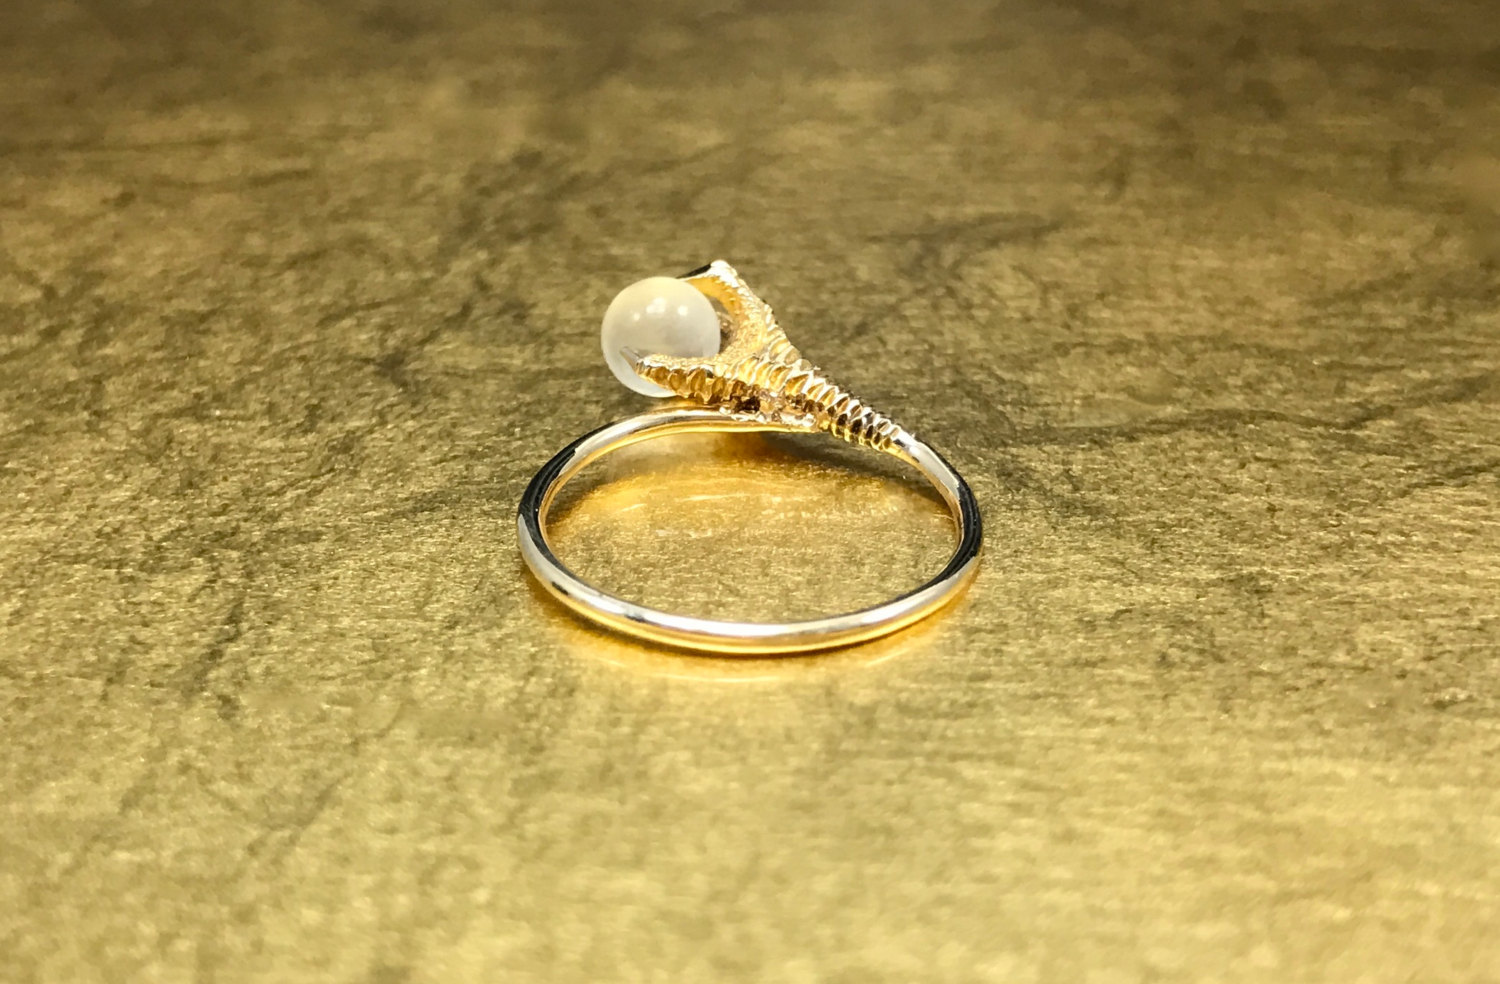 Harry Potter Women's Gold Plated Deathly Hallows Ring - Walmart.com